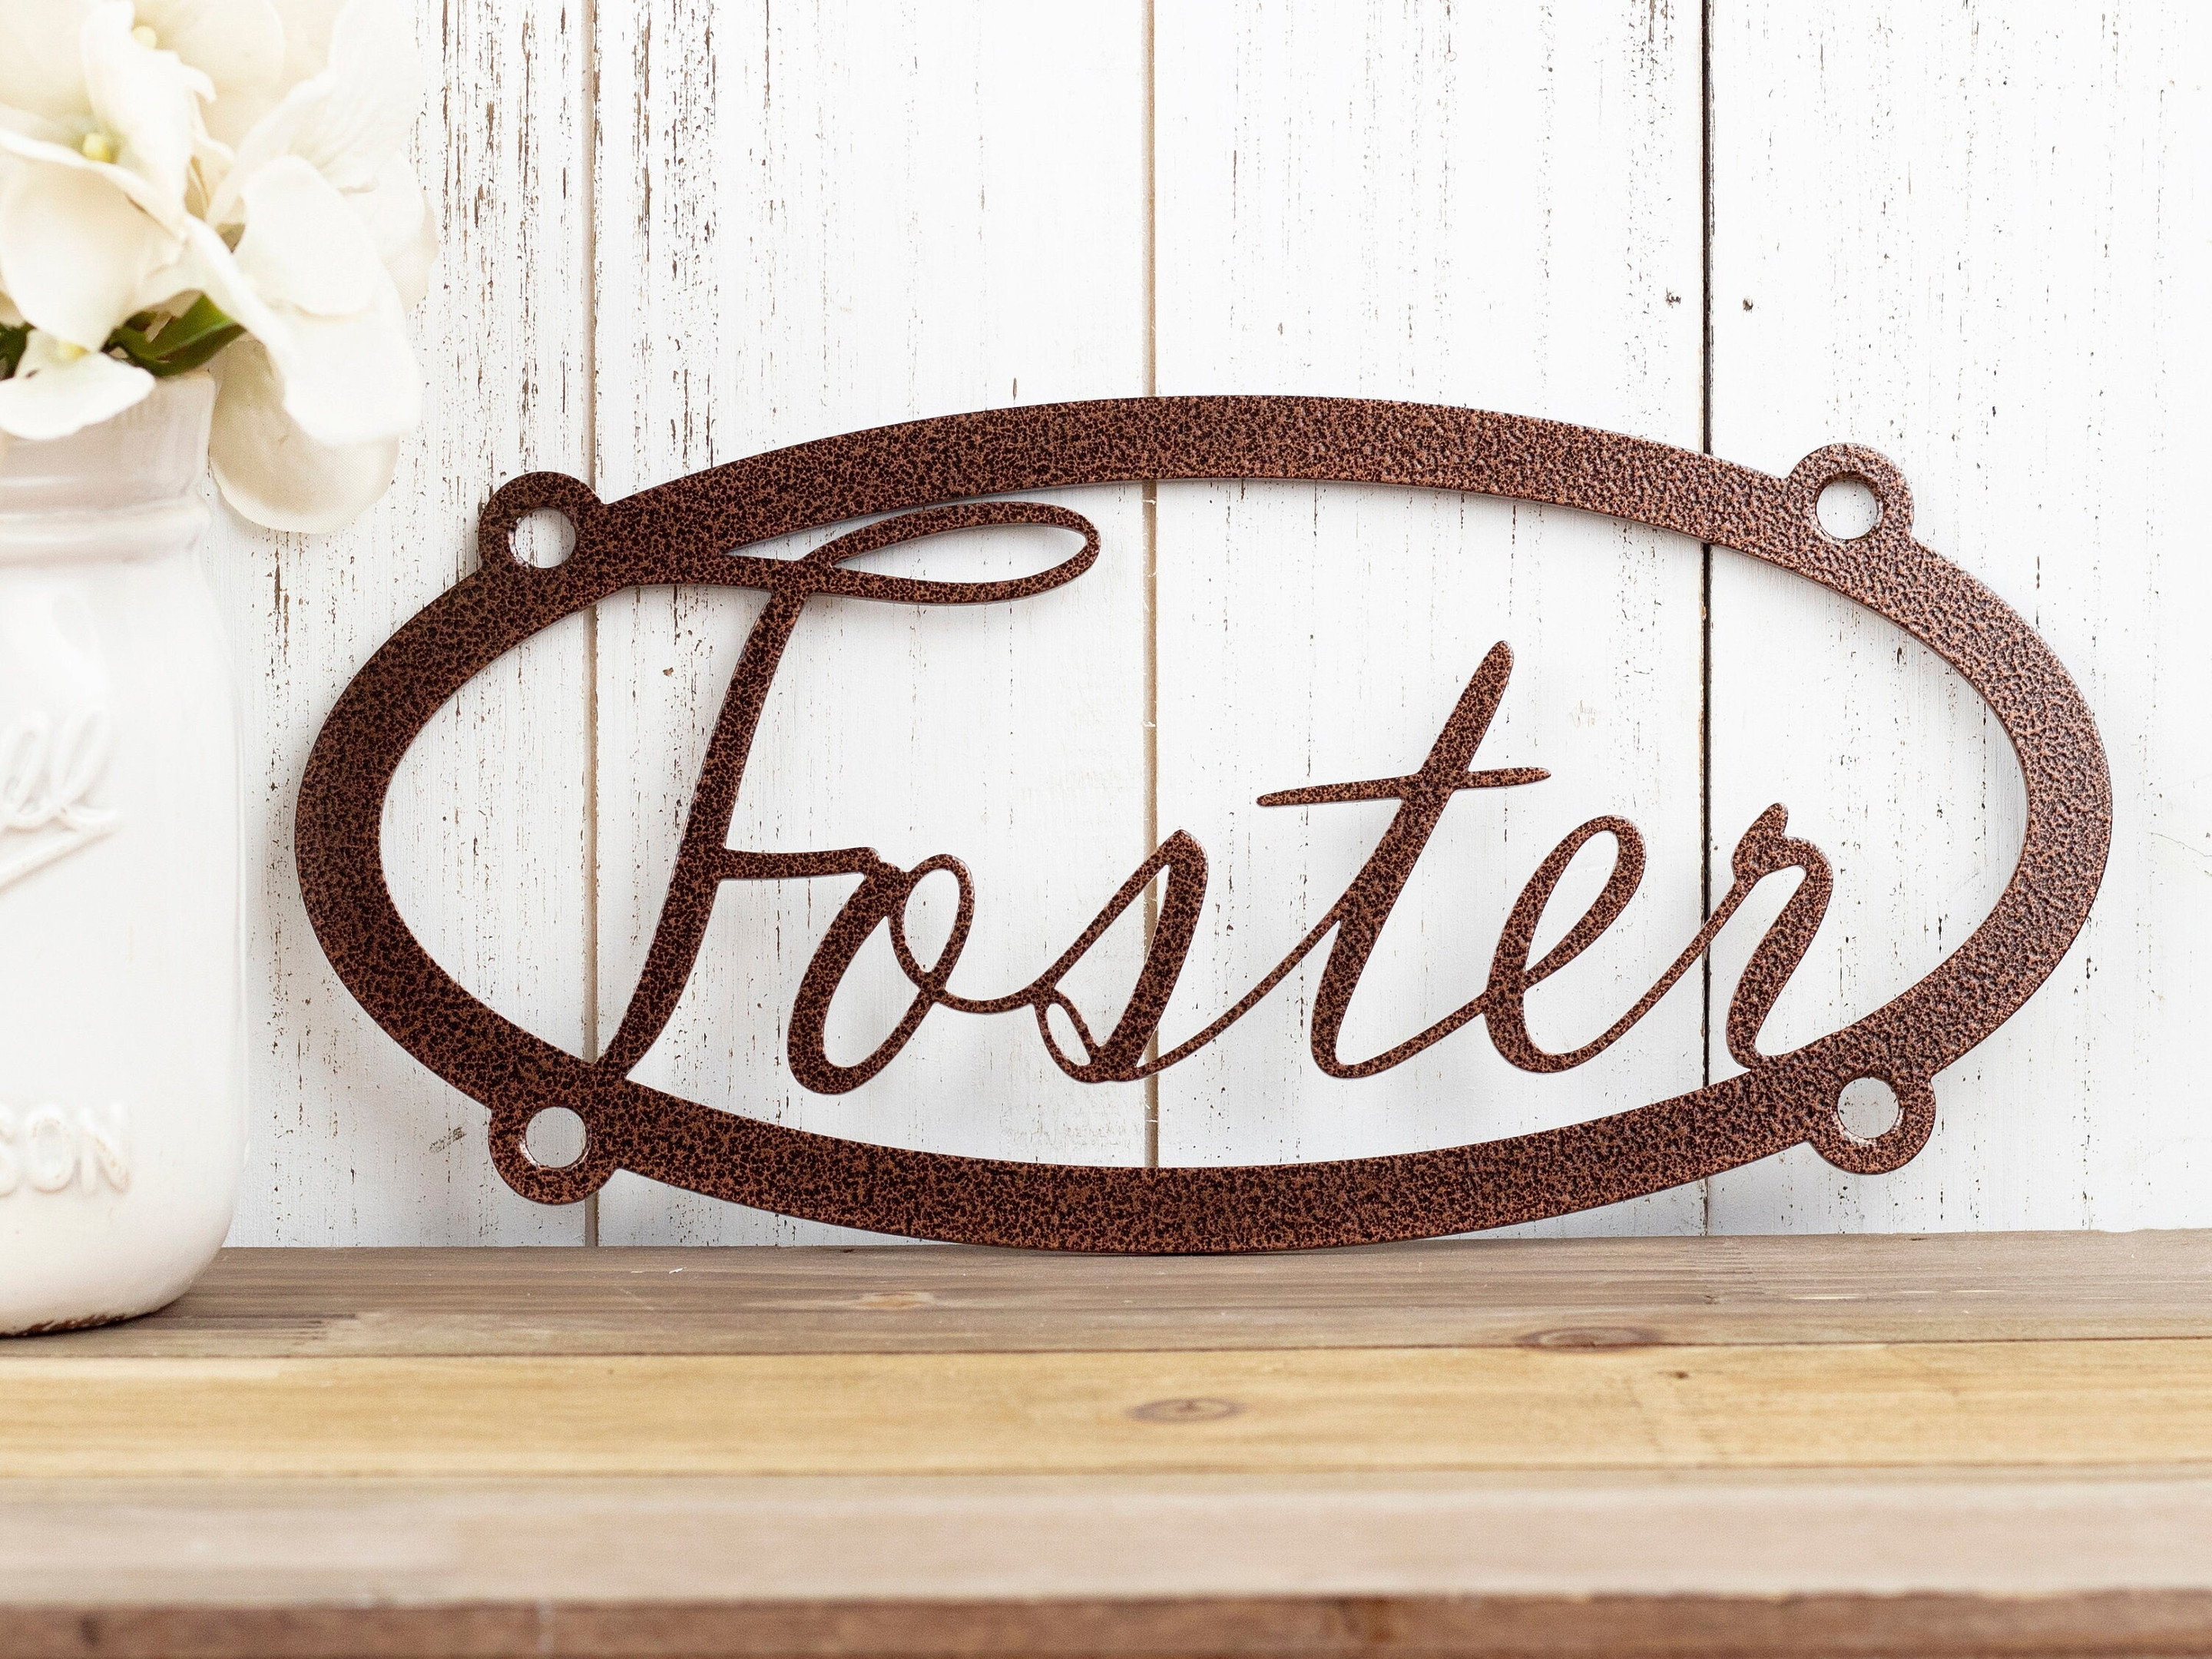 Custom Name Metal Sign, Child Name, Custom Sign, Personalized Sign, Metal Wall Art, Wall Hanging, Name Sign, Custom, Laser Cut Metal Signs Custom Gift Ideas 12x12IN